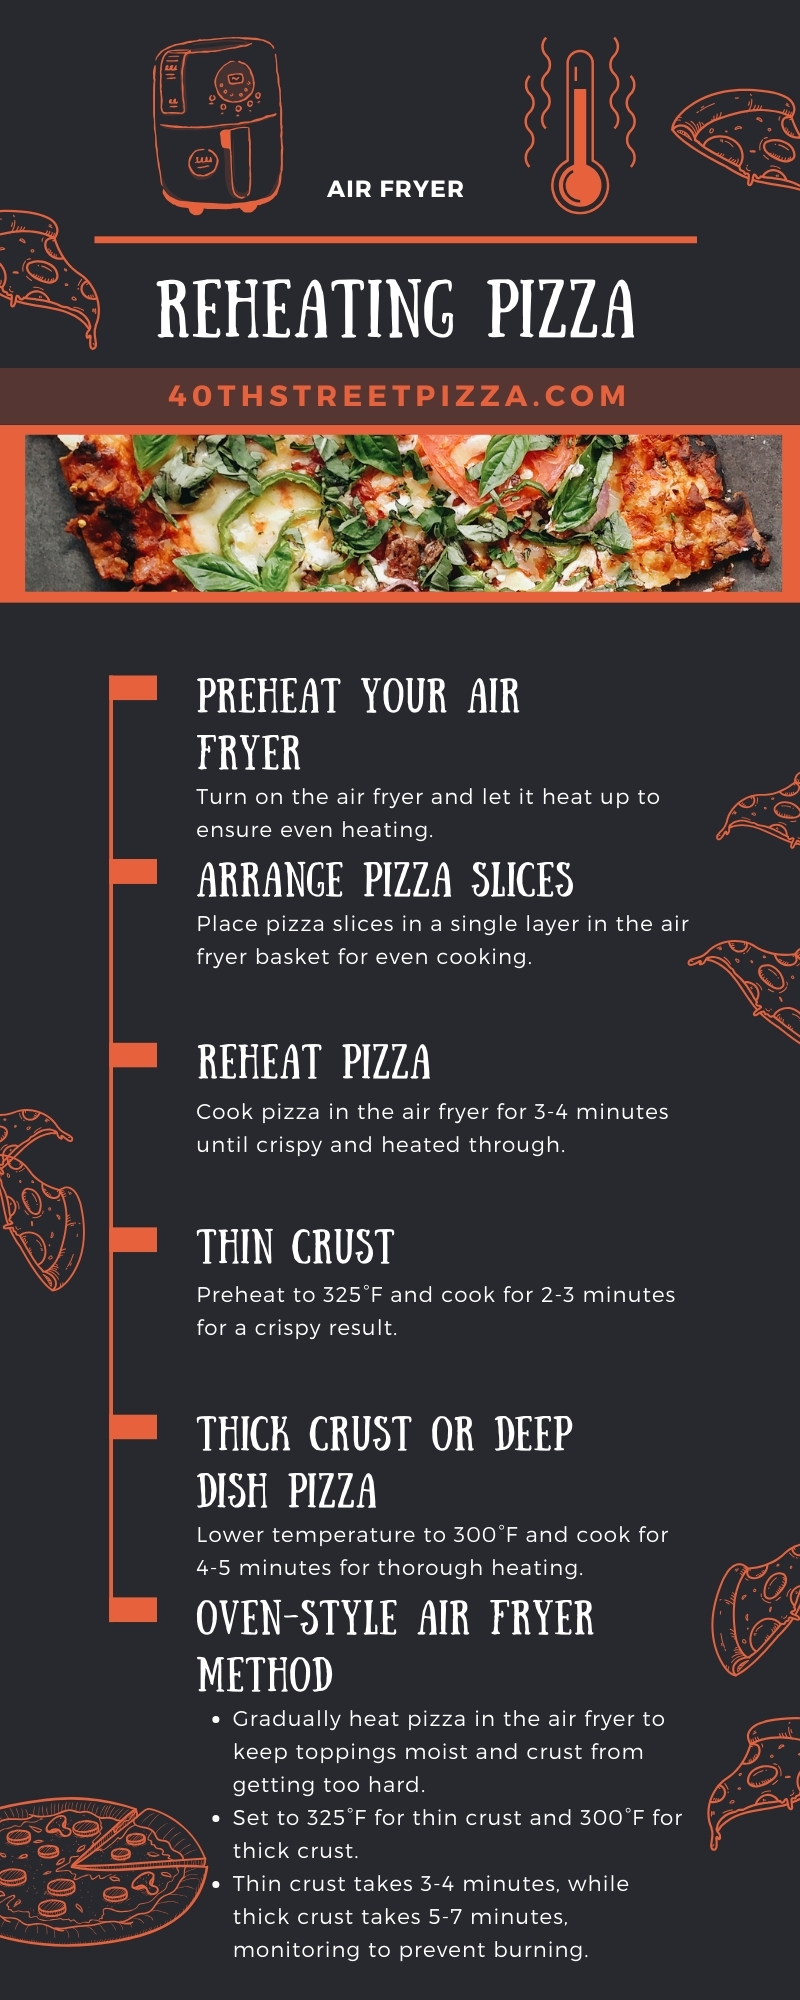 A Step-By-Step Guide to Reheating Pizza in The Air Fryer